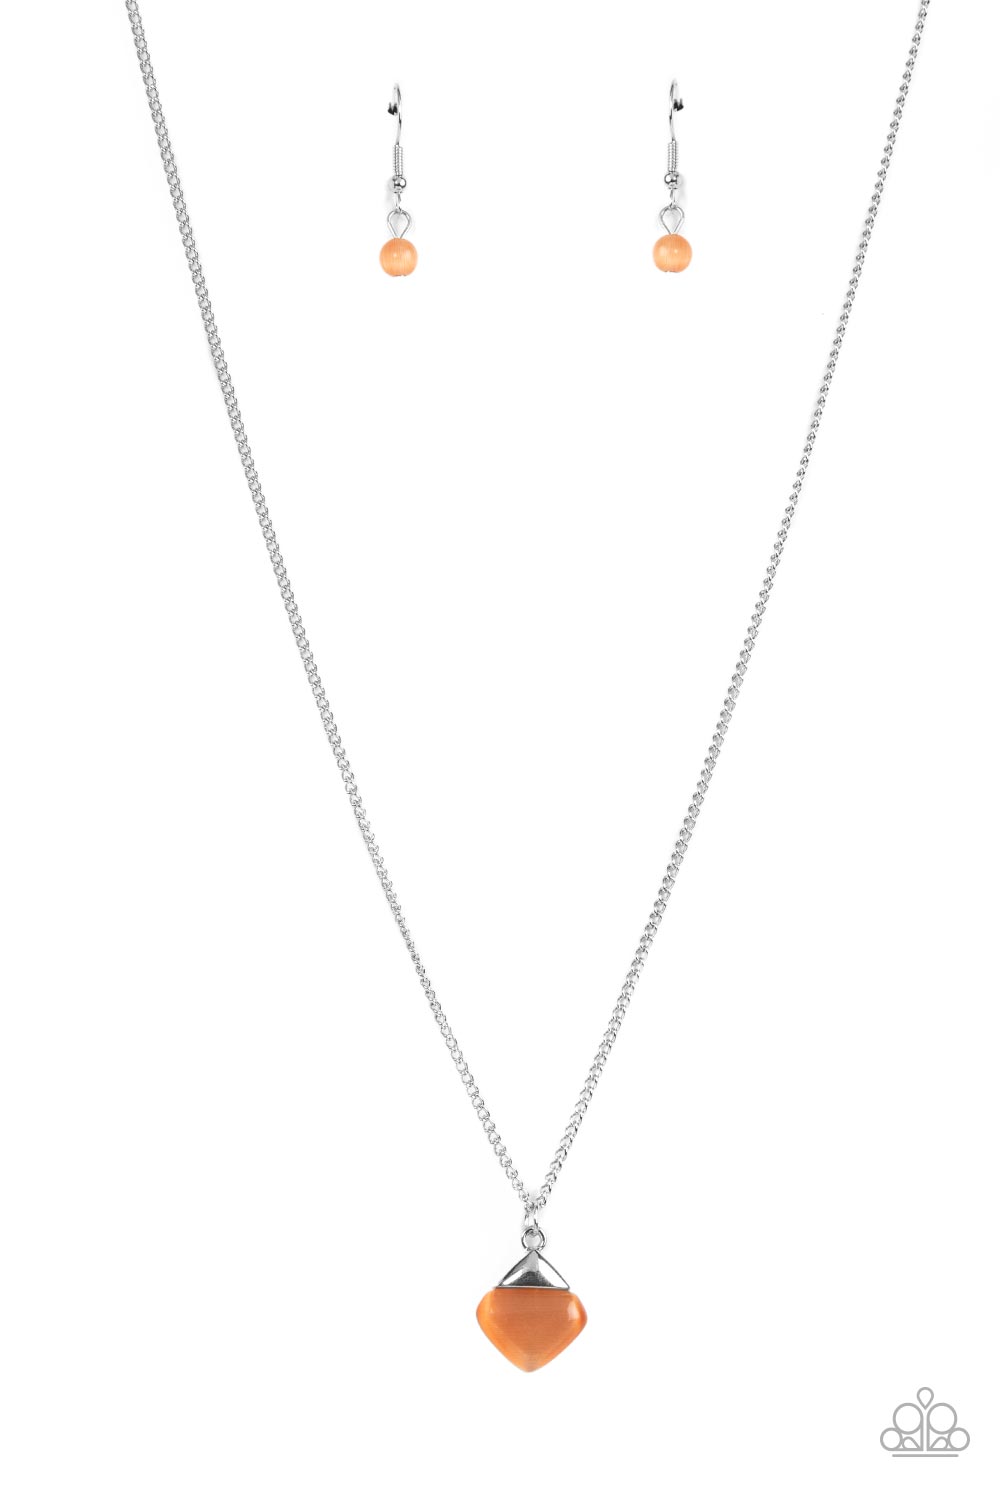 Gracefully Gemstone Paparazzi Accessories Necklace with Earrings Orange